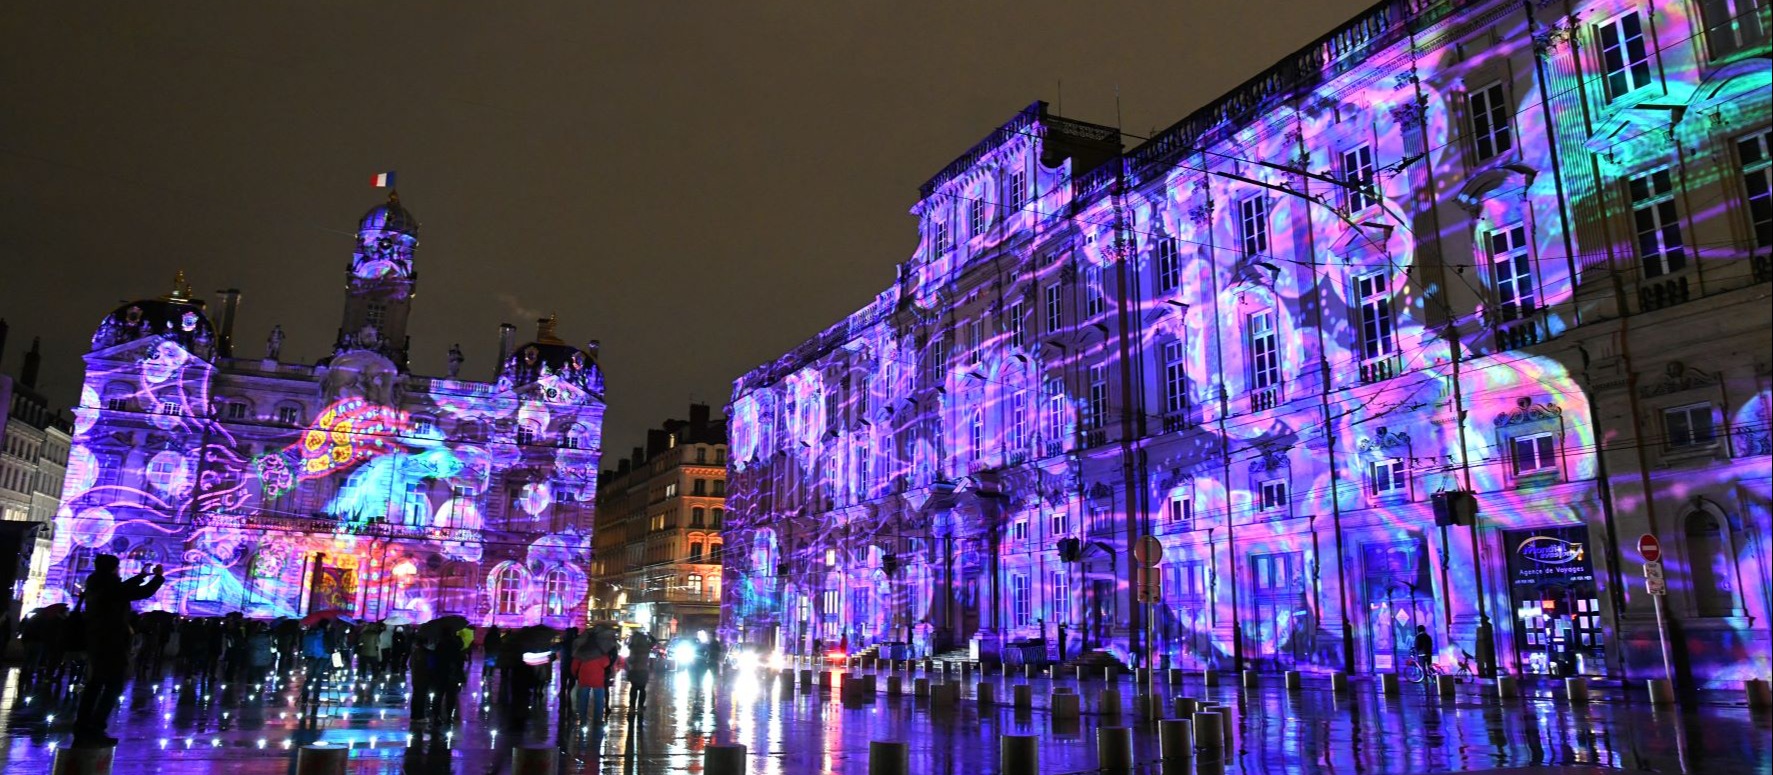 The Festival of Lights or Fete Lumieres in Lyon in December